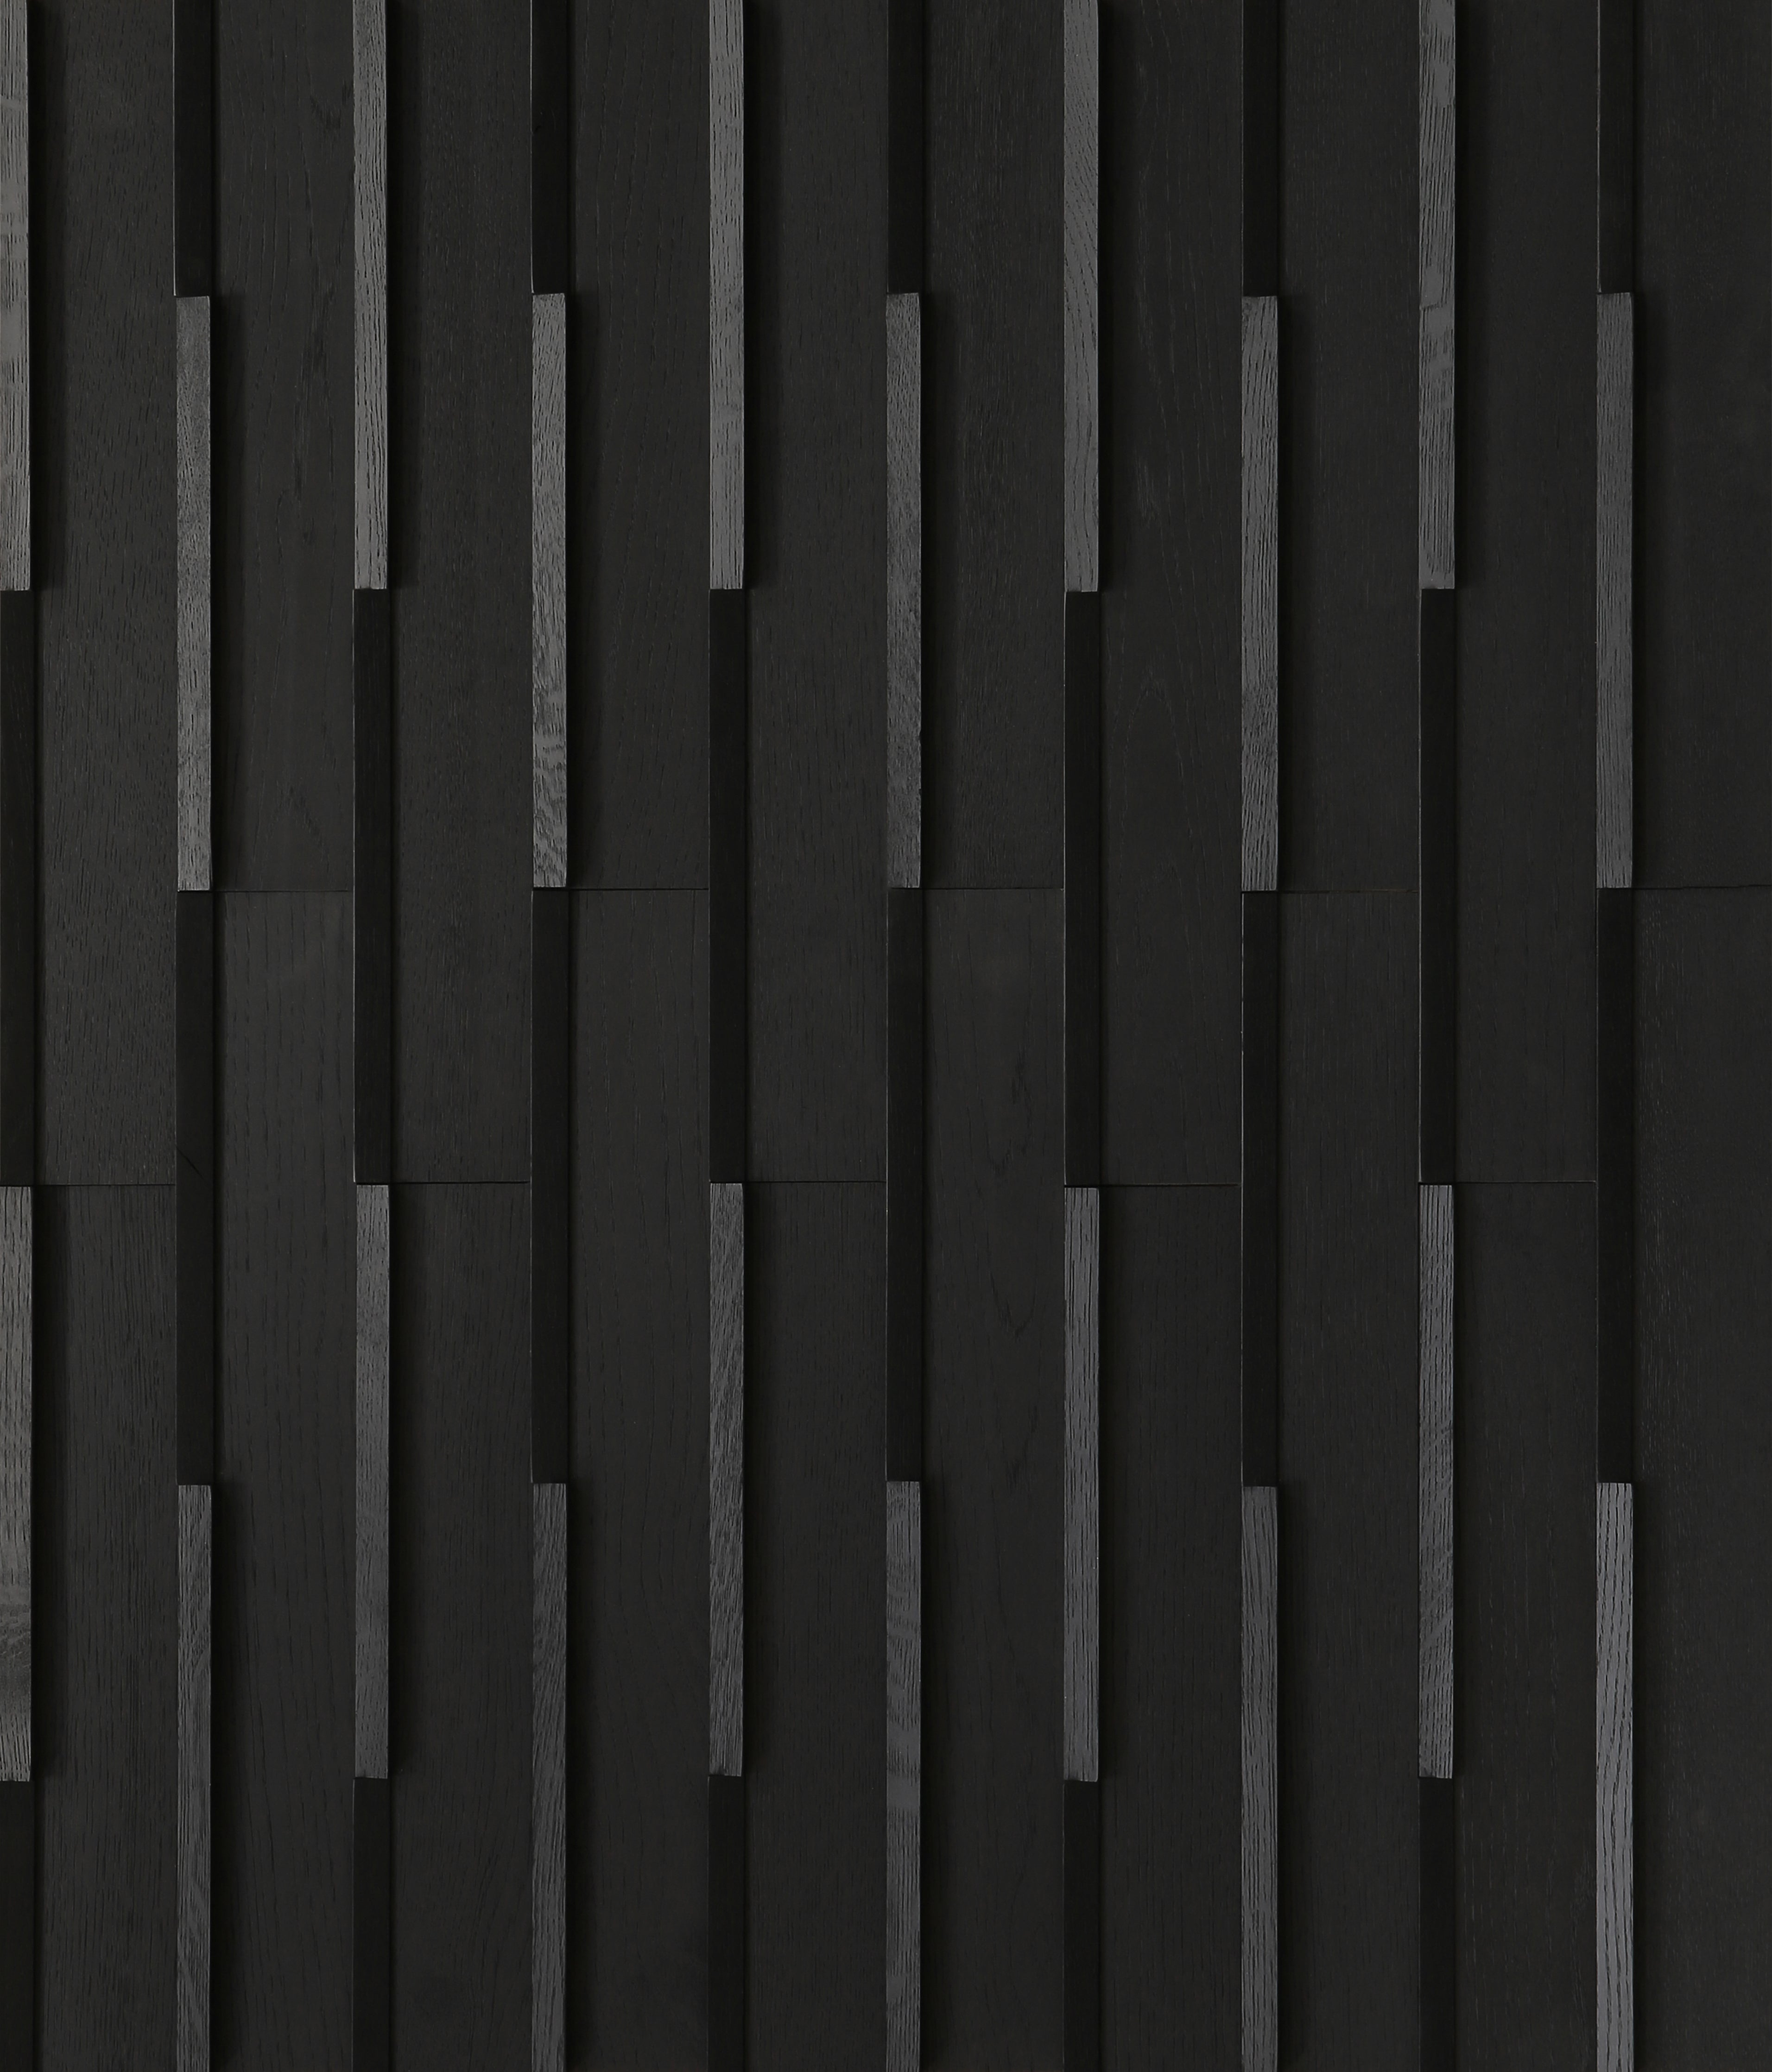 duchateau inceptiv edge noir oak three dimensional wall natural wood panel lacquer for interior use distributed by surface group international